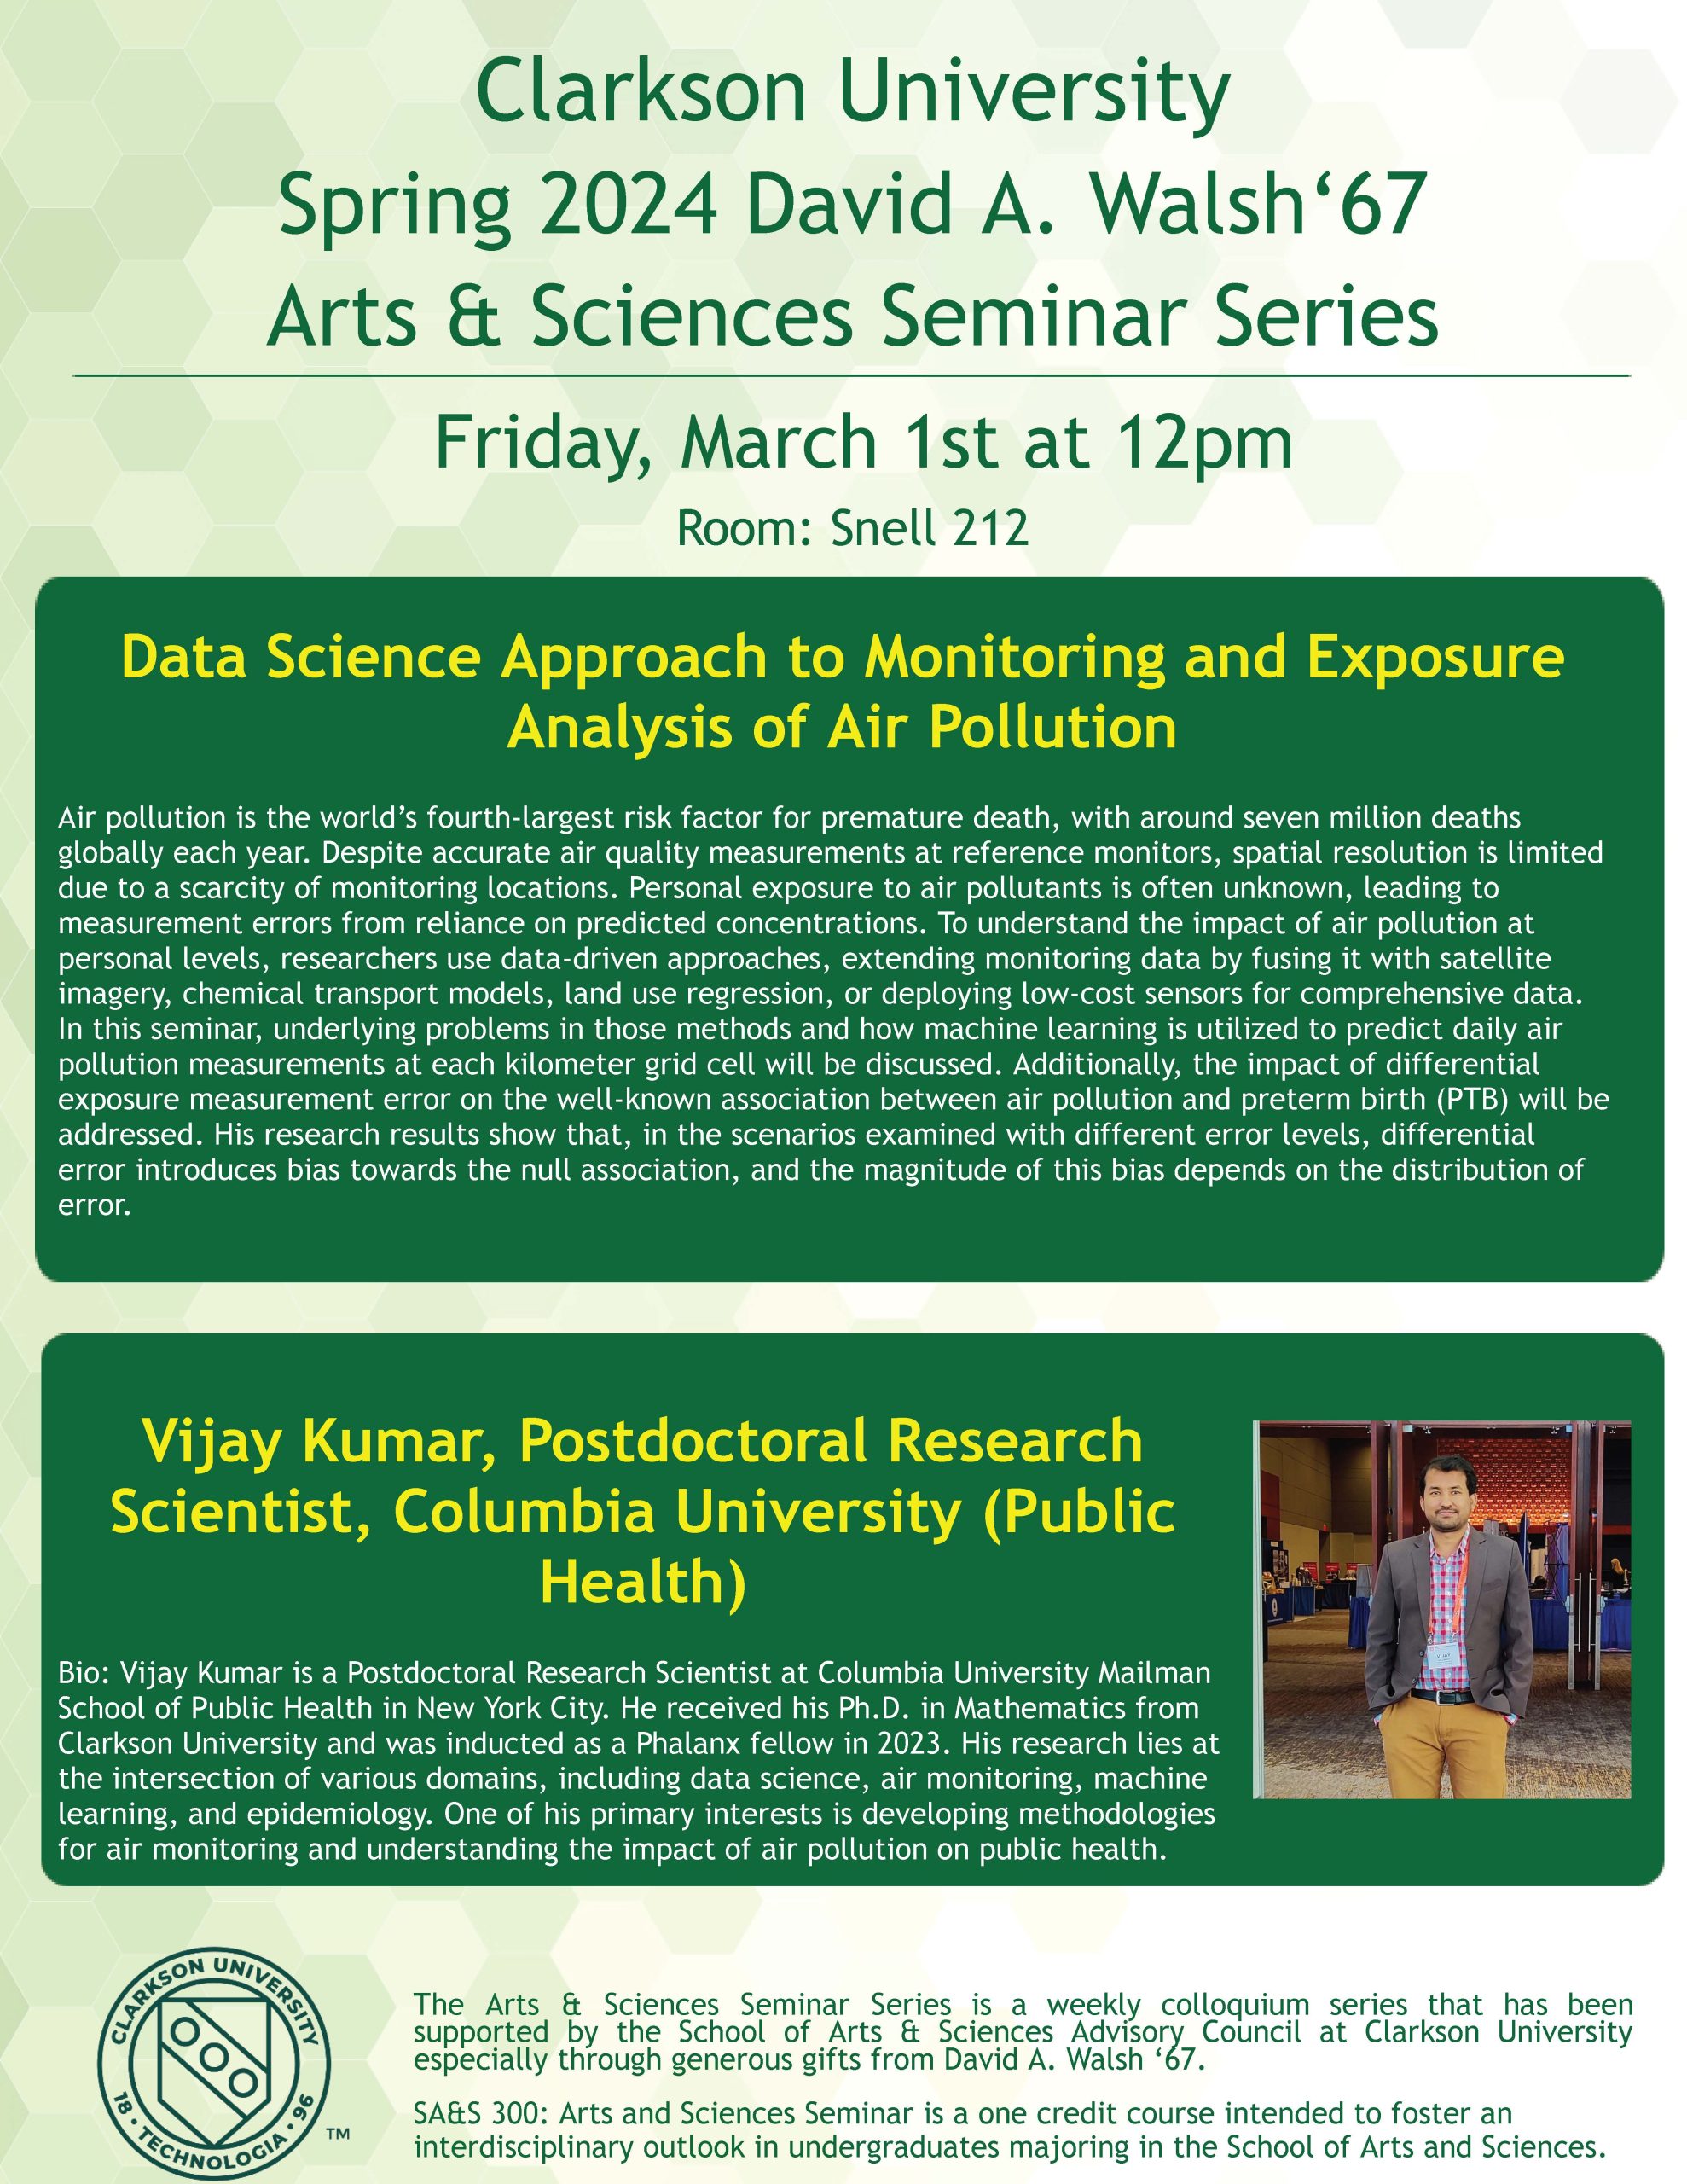 David A Walsh Arts and Science Seminar talk this Friday March 1st at noon in Snell 212.